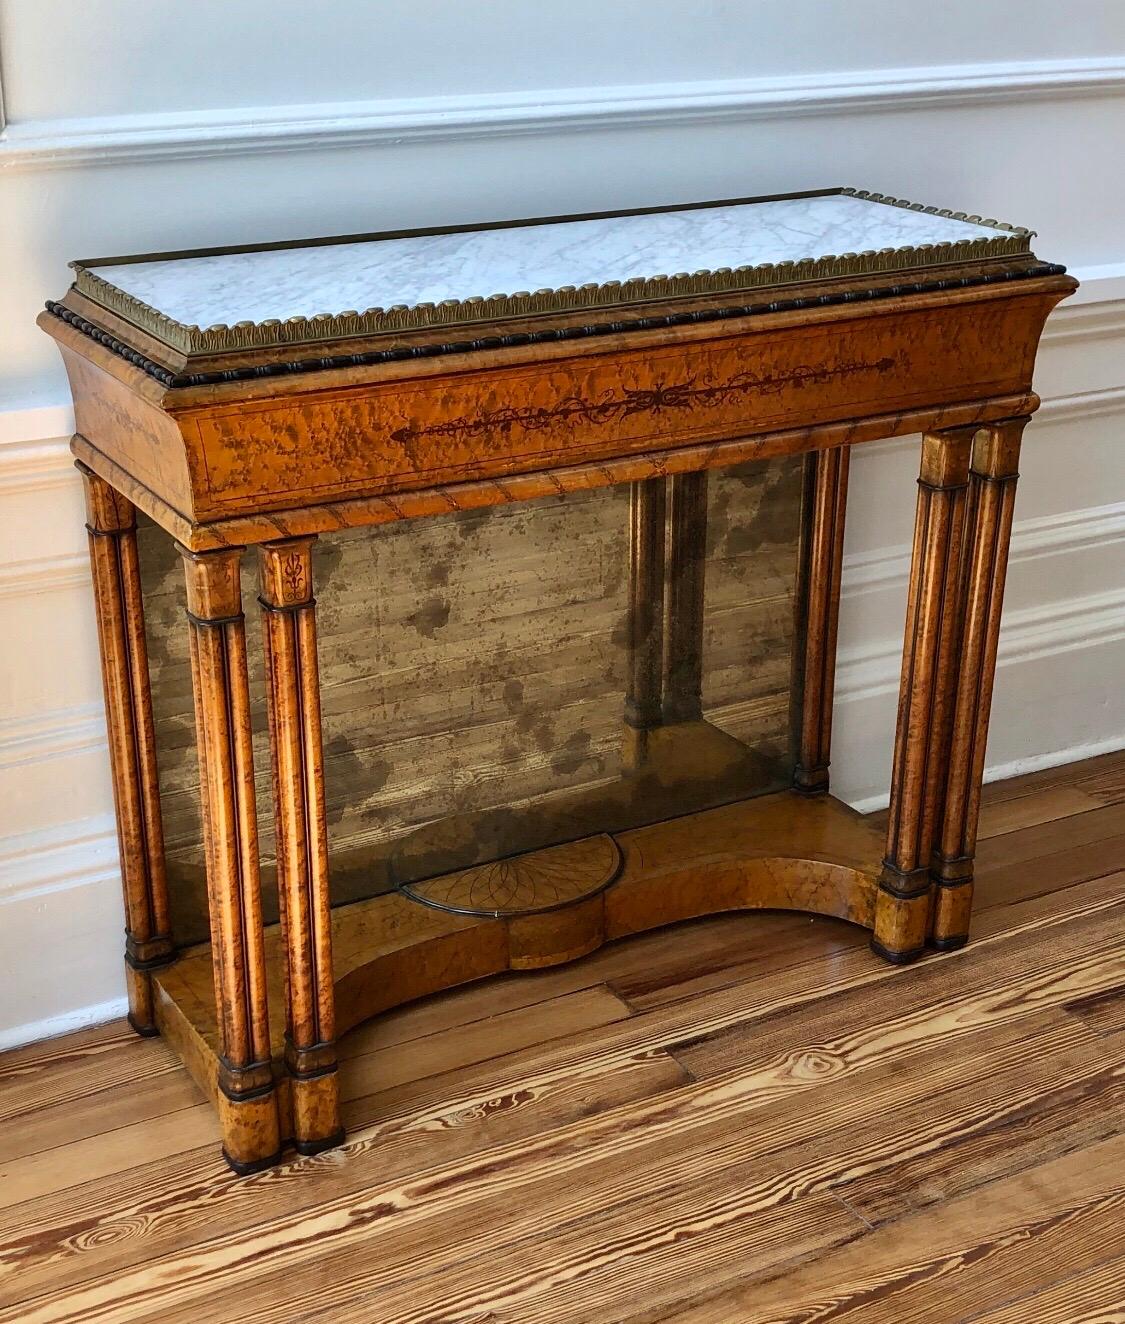 This elegant Charles X jardinière has an Anthemion Brass Gallery with inset marble top. The console has figured bird’s-eye maple with exceptional tulipwood, amaranth and ebonized inlay. The Architectural Design is prevalent in the Classical Inlay